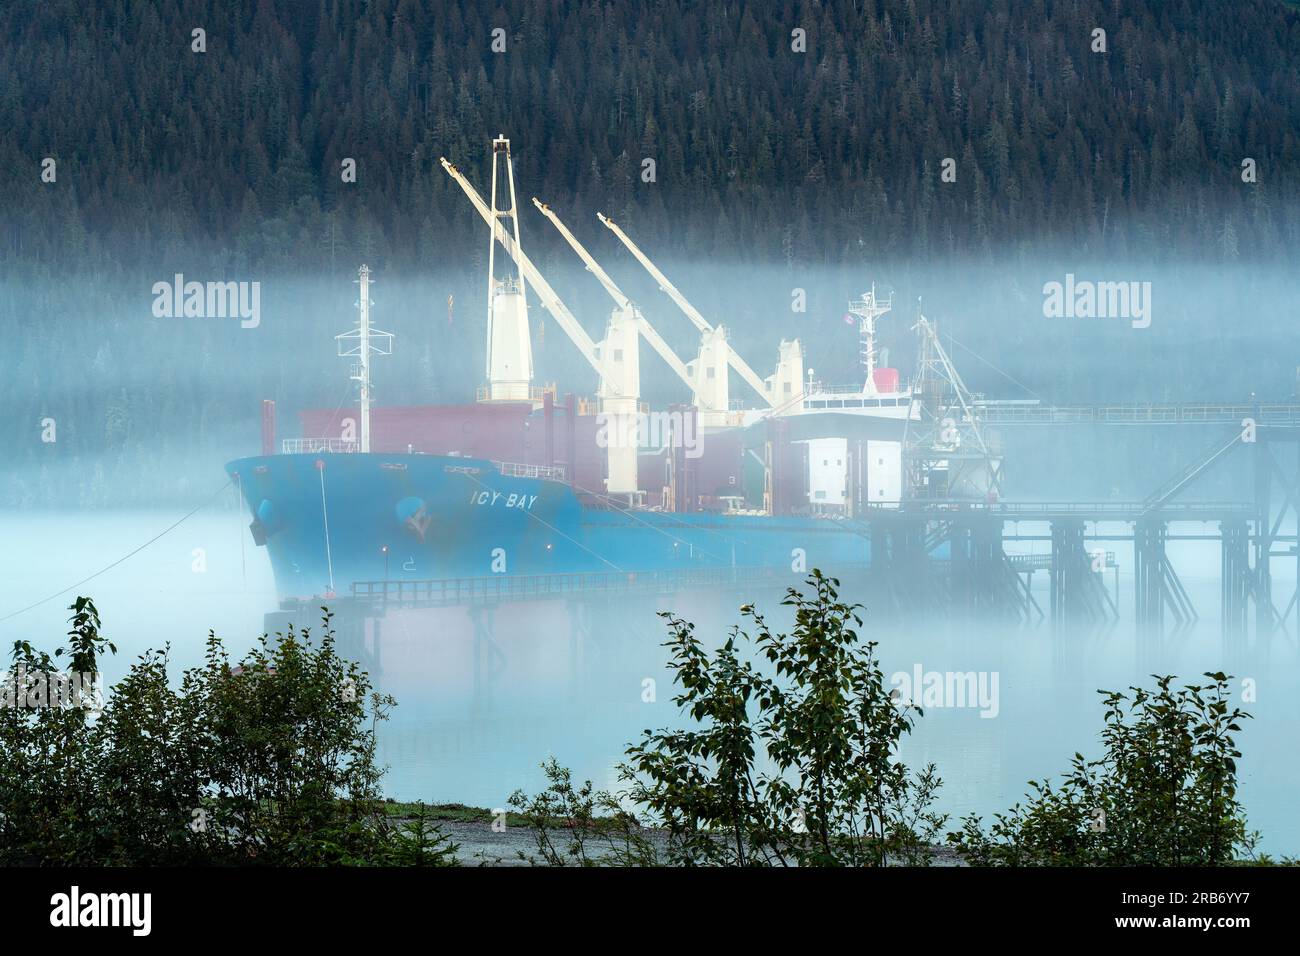 Tanker in the mist with pine trees forest, Stewart, British Columbia, Canada. Stock Photo